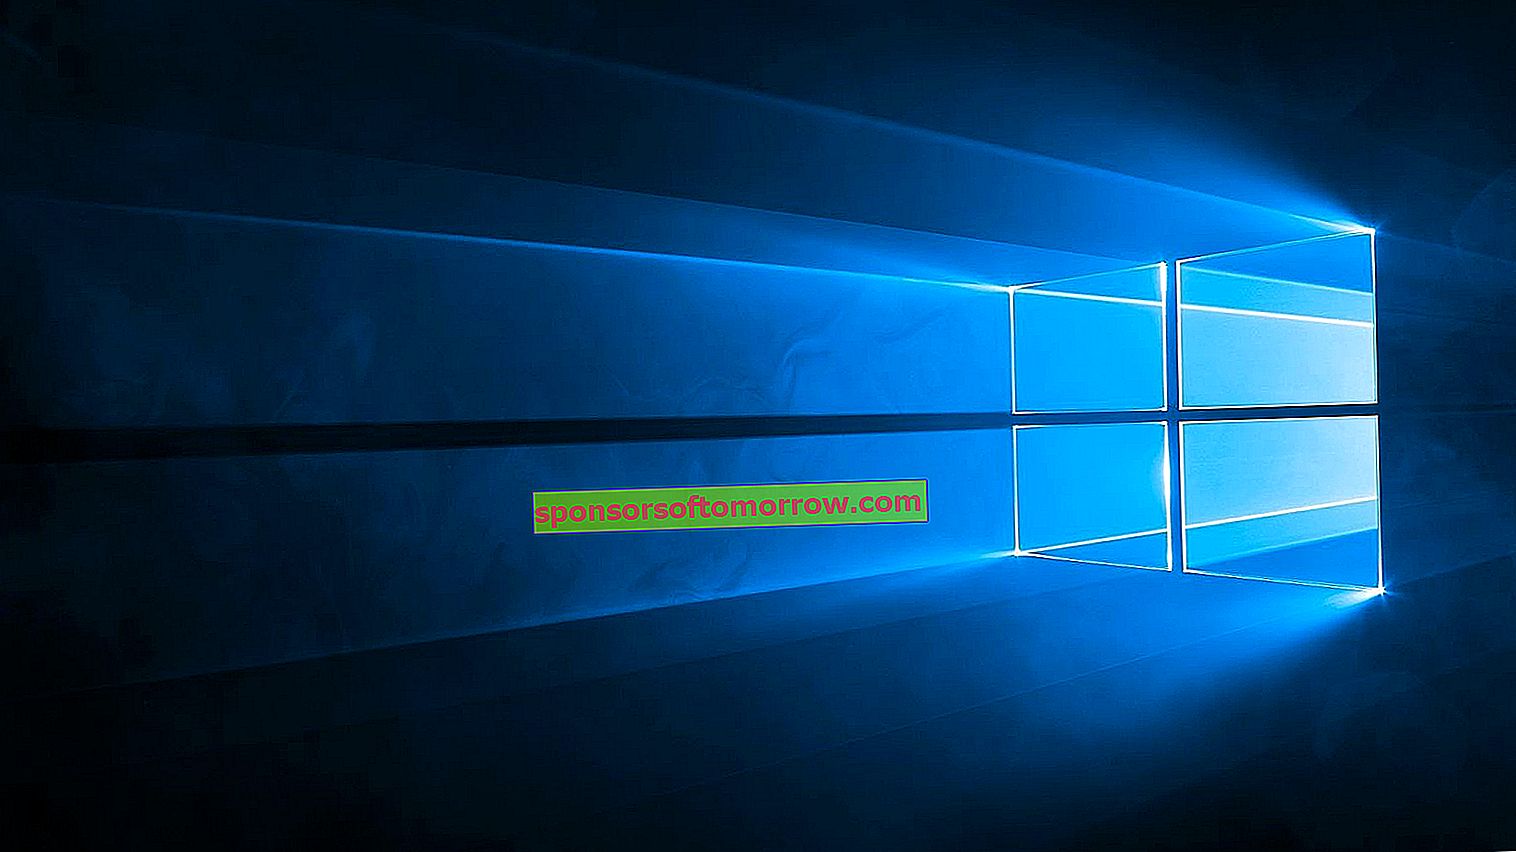 Everything you need to know about Windows 10 updates